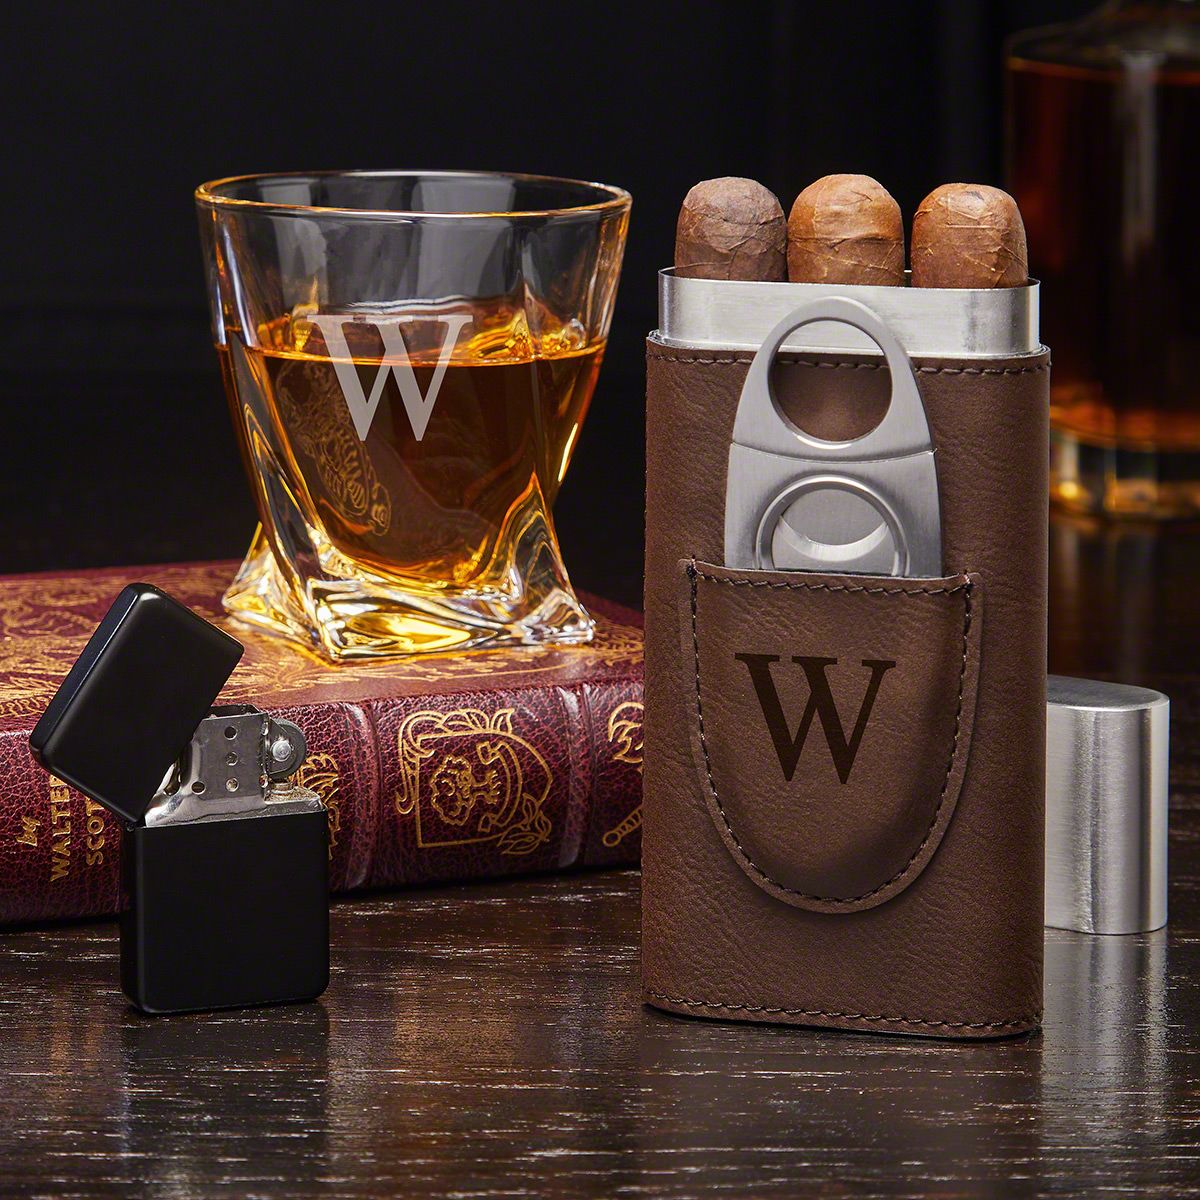 https://images.homewetbar.com/media/catalog/product/8/0/8066-single-initial-twist-glass-with-brown-cigar-holder-and-black-lighter.jpg?store=default&image-type=image